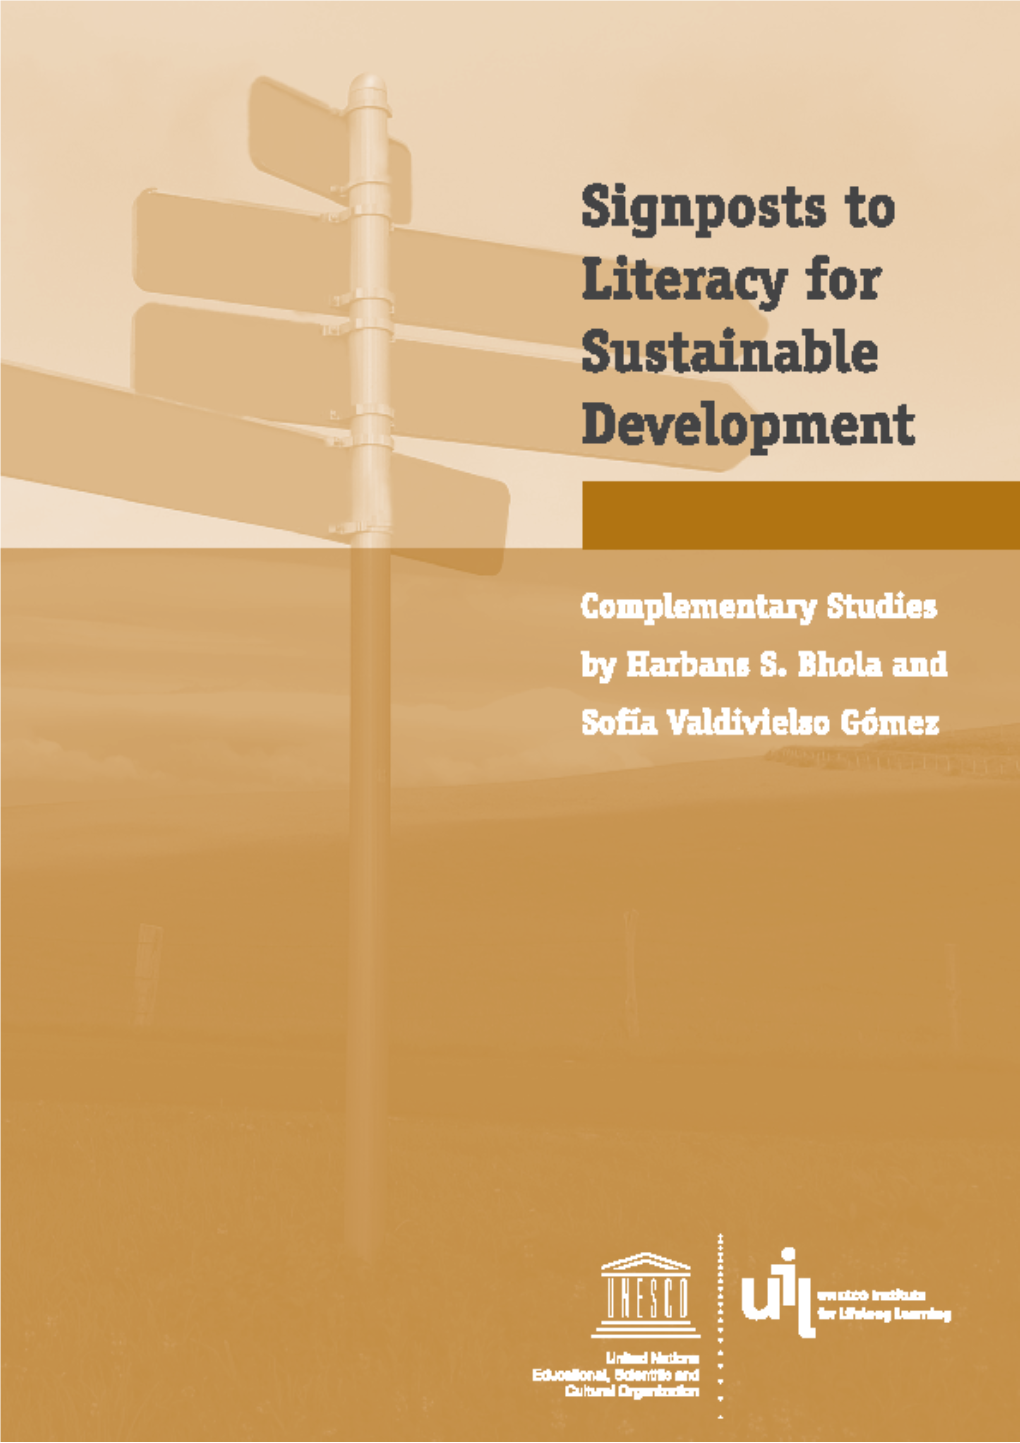 Signposts to Literacy for Sustainable Development